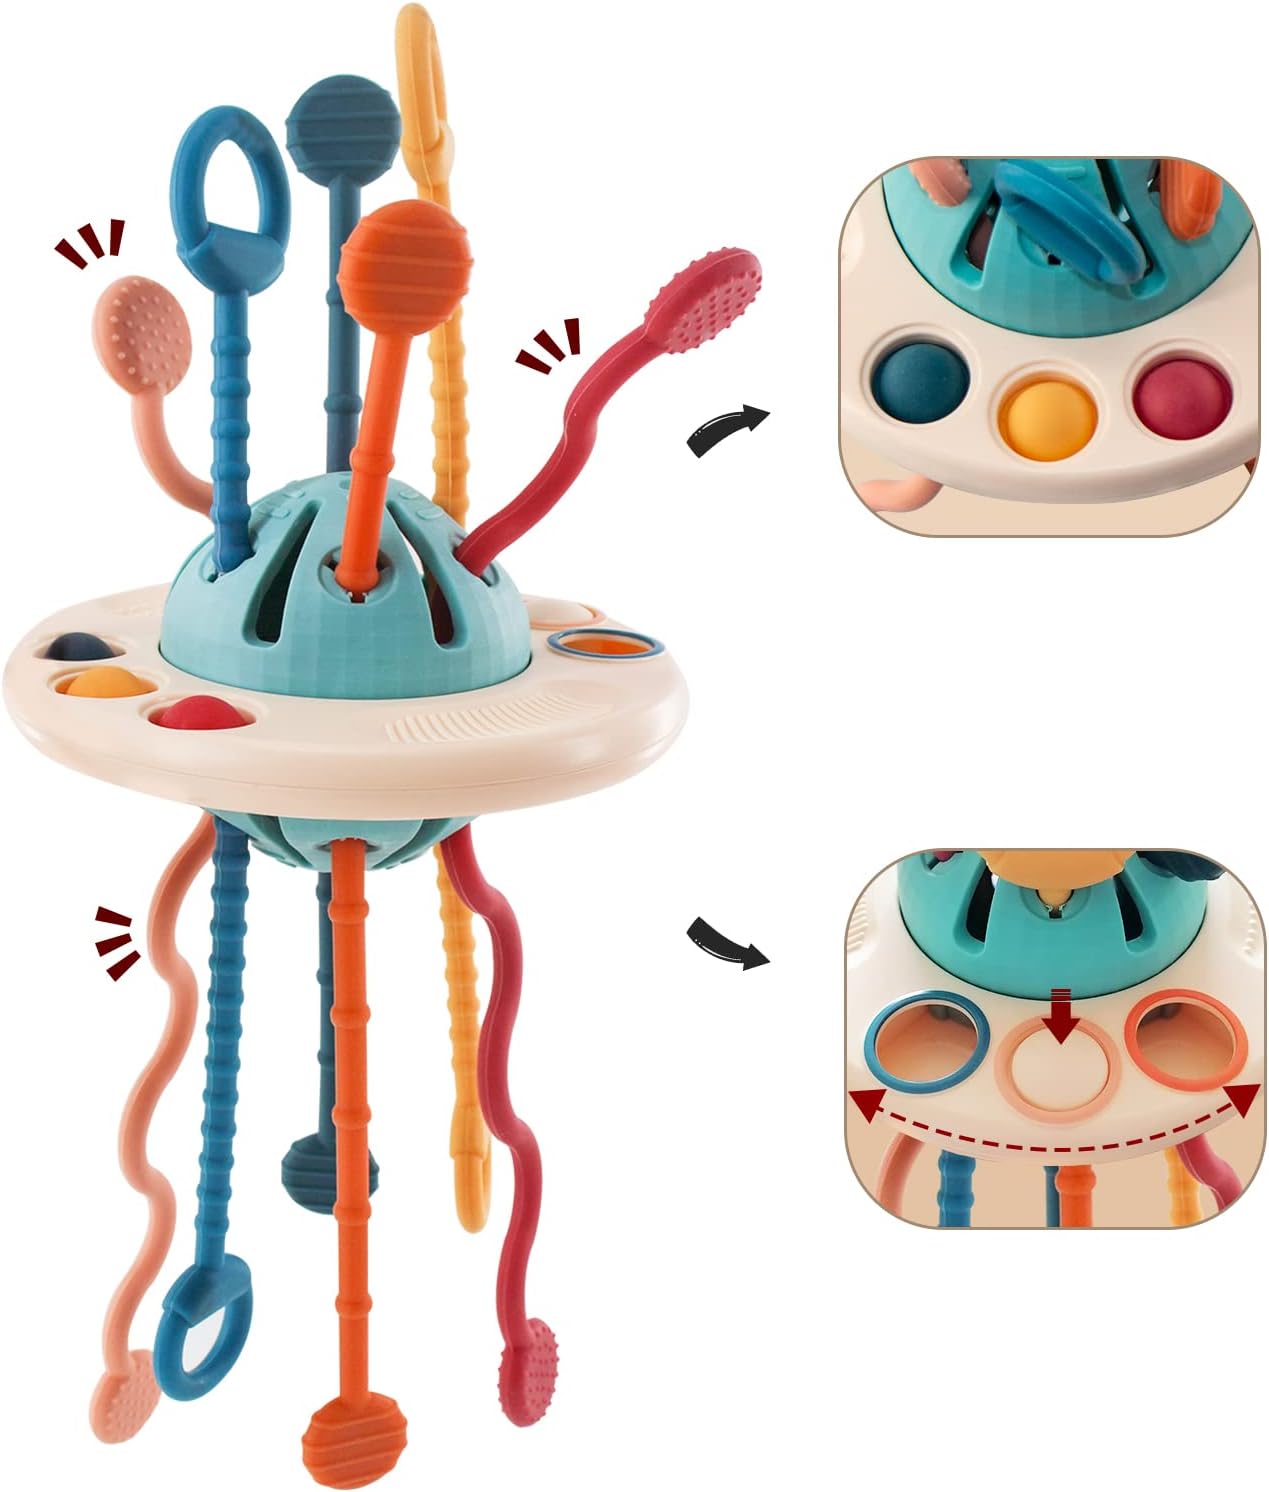 Pull string activity toy, sensory toy, fine motor skills, great for traveling